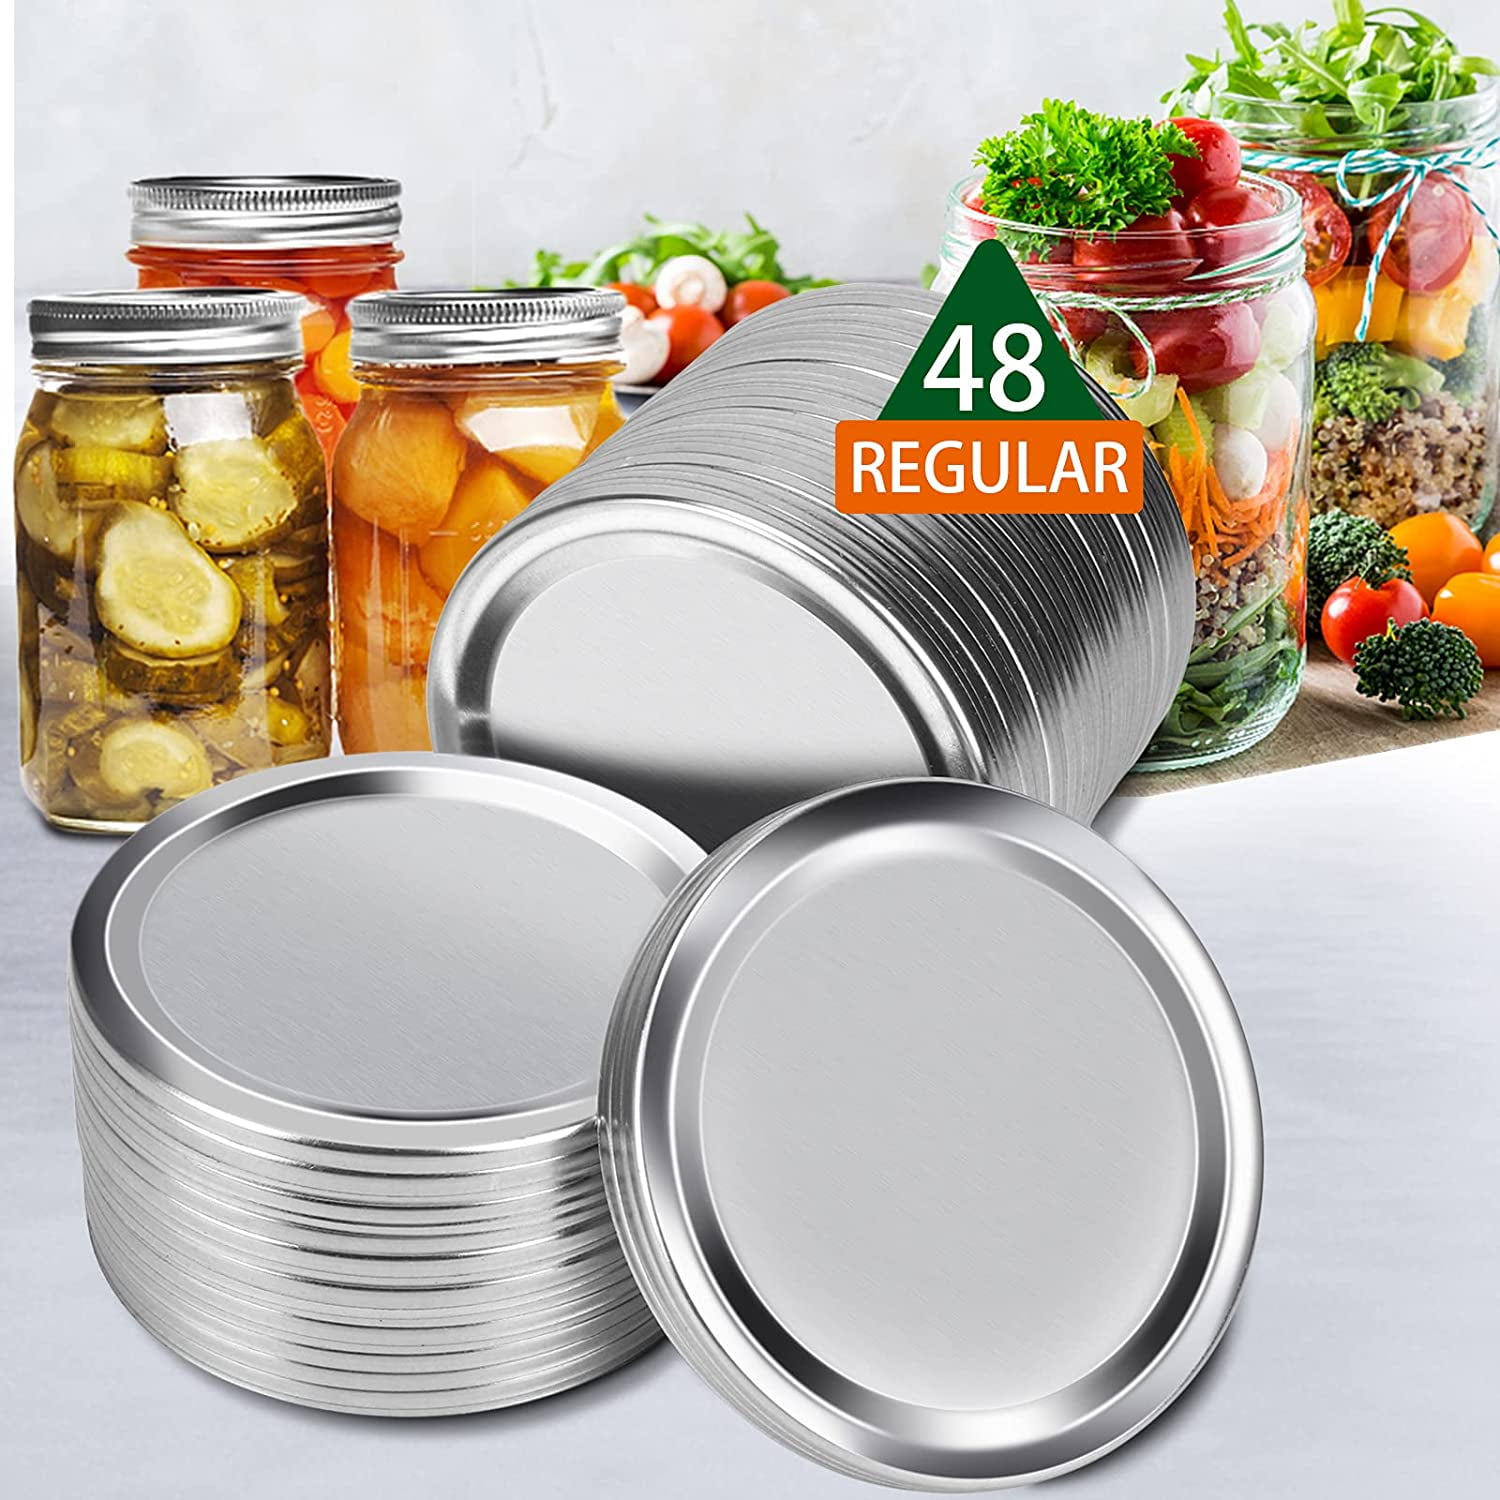 48 Pieces Regular Canning Jar Lids and Rings Set for Ball Split-type Thick Metal Mason Jar Lids and Rings for Canning,Food Grade Material,100% Fit & Airtight for Regular Mouth Jars Kerr Jars 